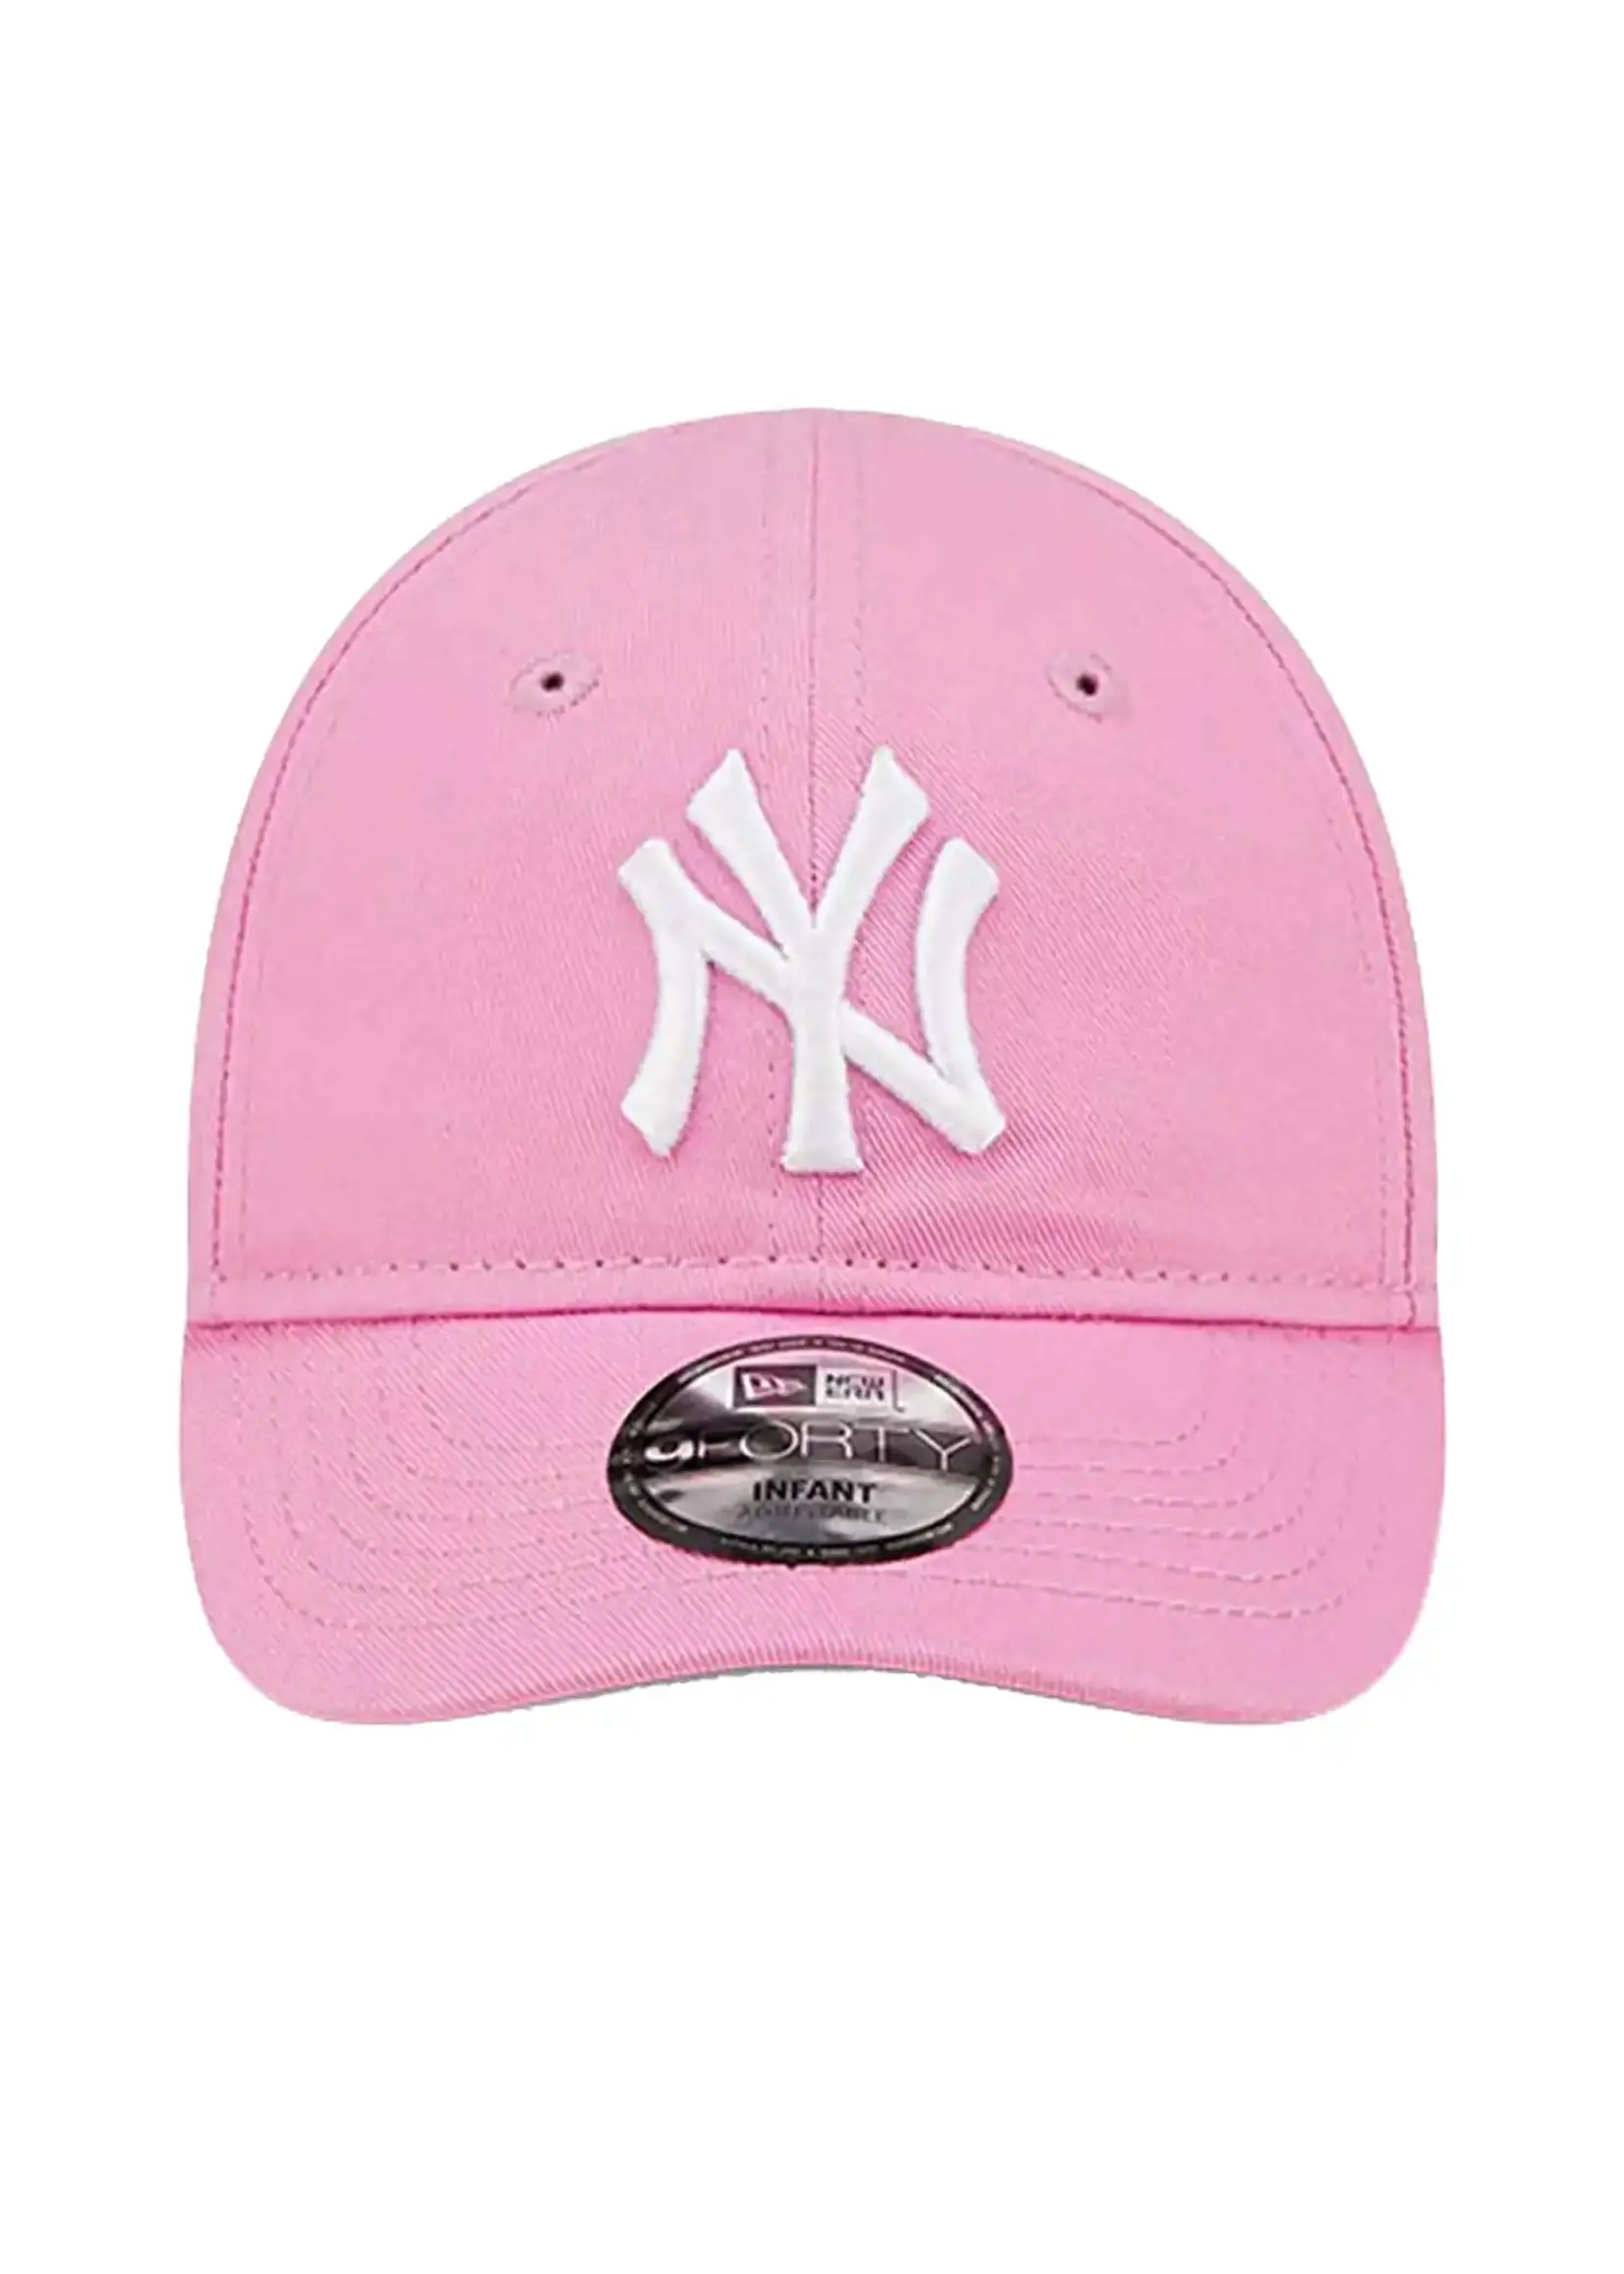 New Era New York Yankees 9Forty Infant Cap Pink White